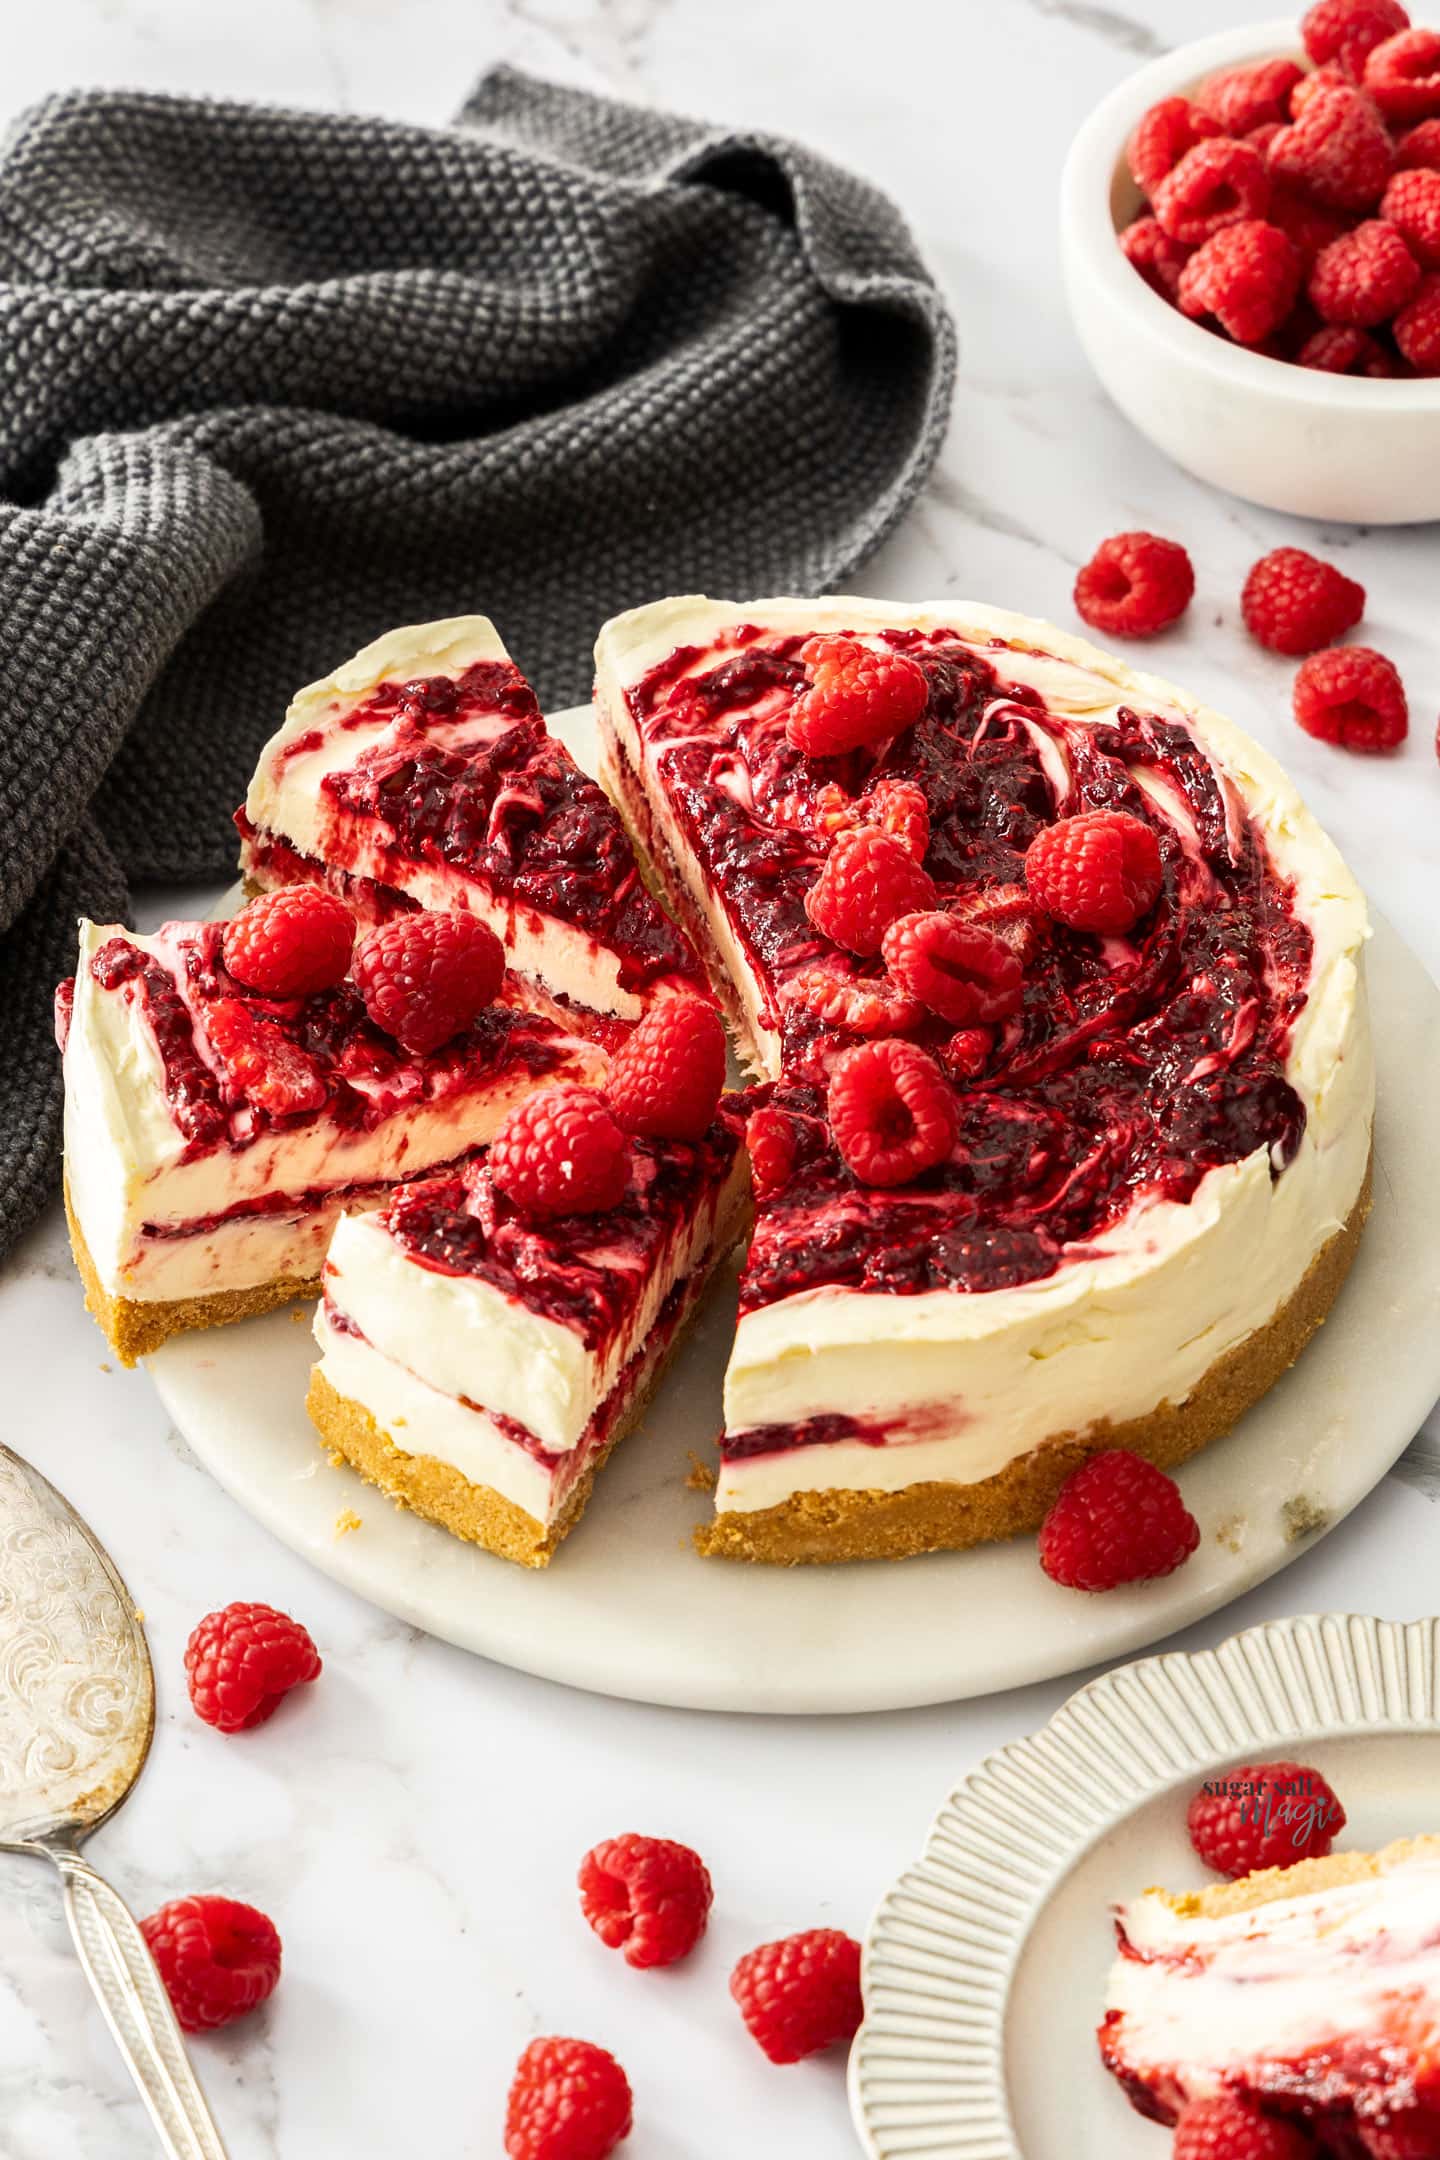 A raspberry cheesecake with 3 slices cut from it.